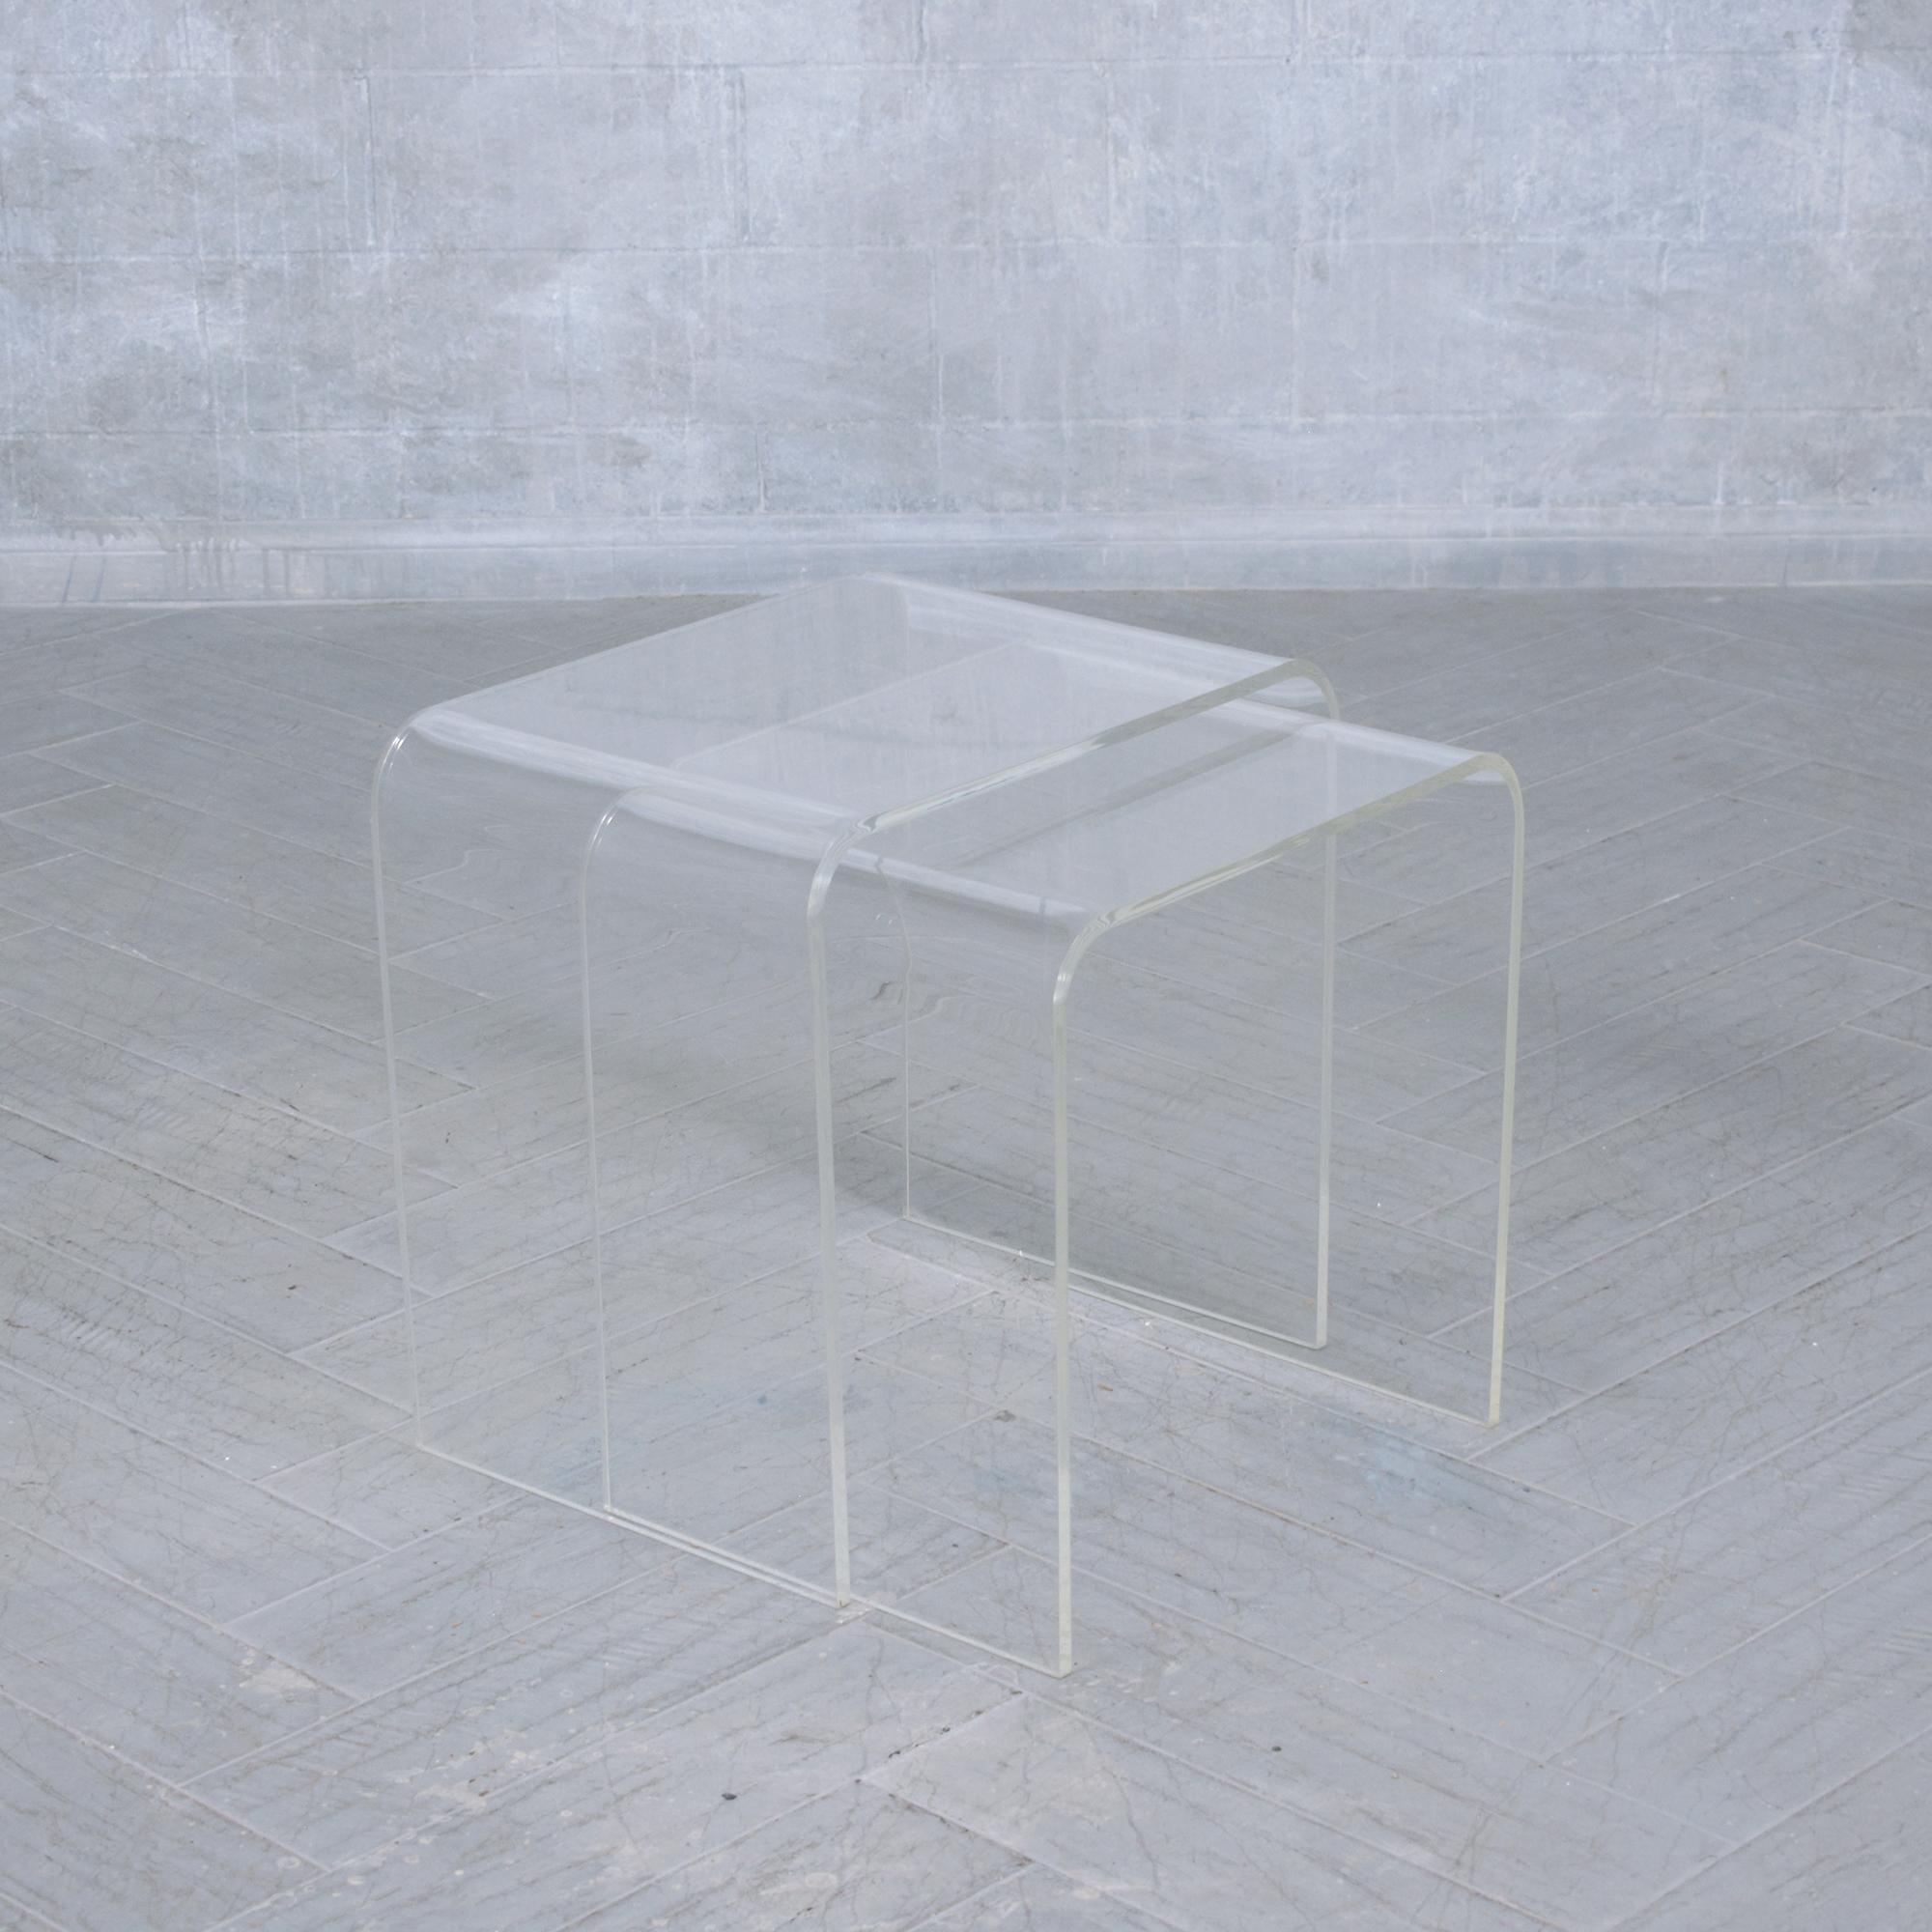 American Set of Mid-Century Modern Lucite Nesting Tables For Sale